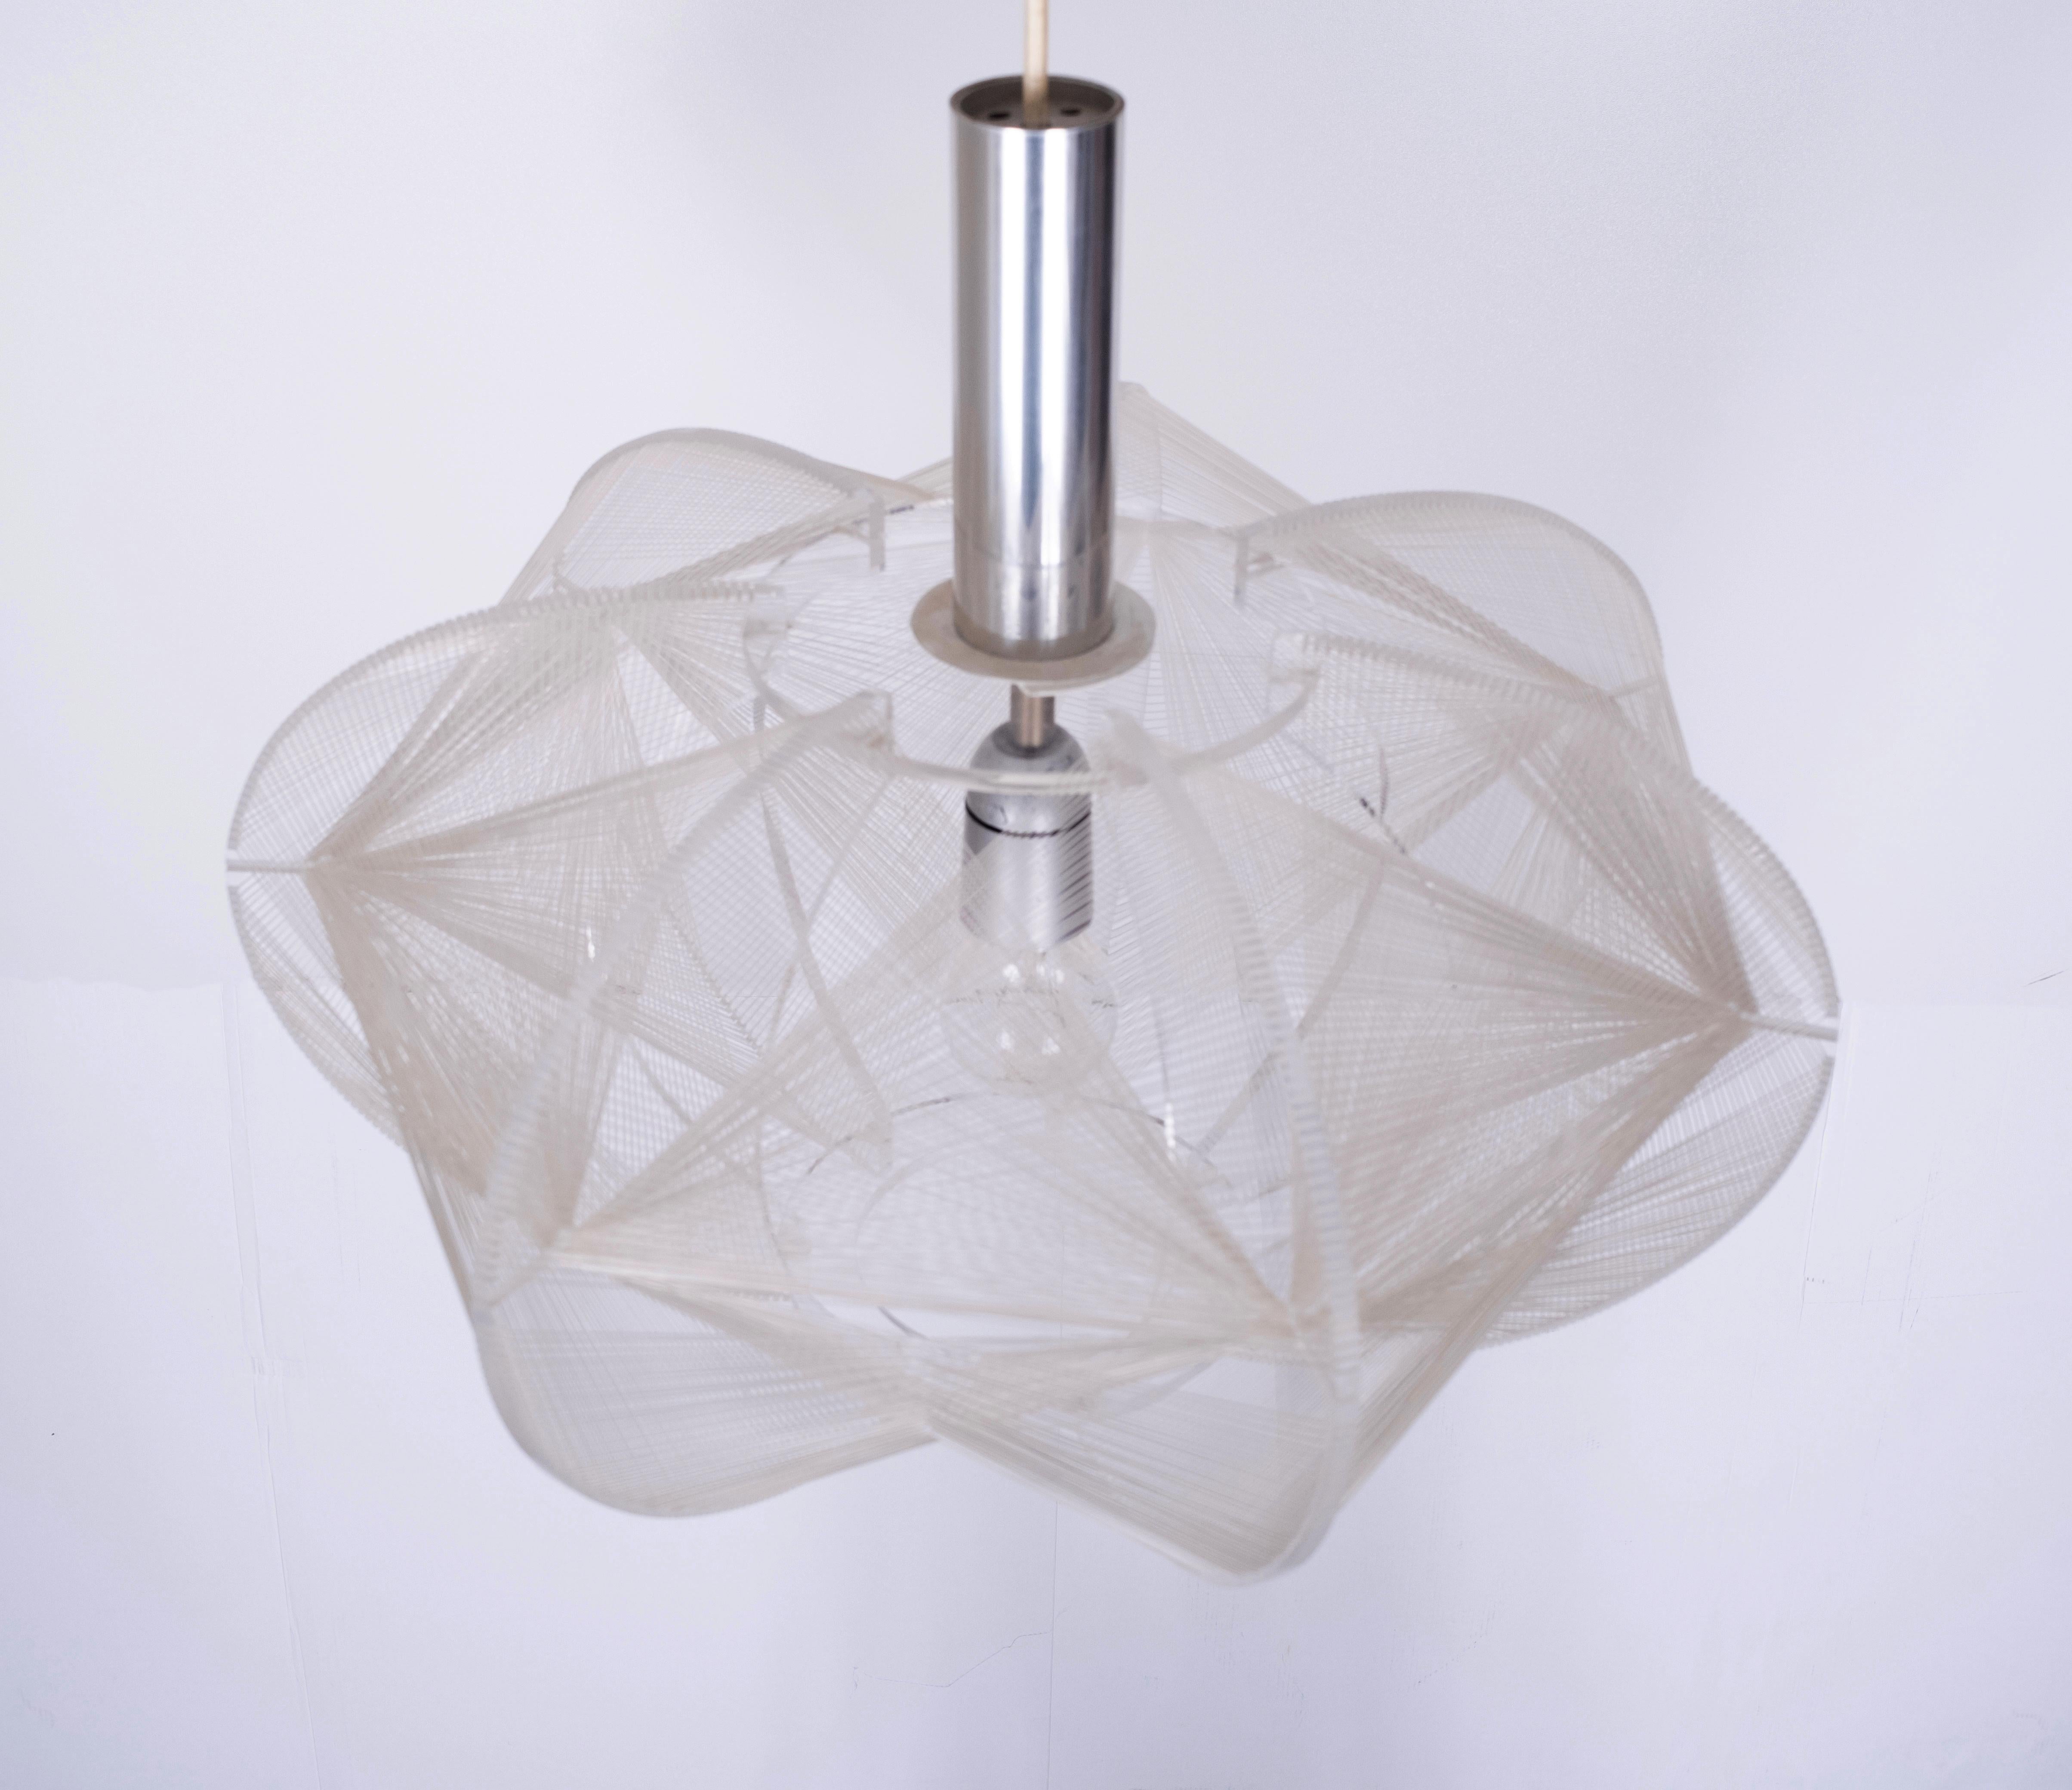 Beautiful wire pendant lamp by Paul Secon for Sompex. The lamp is made of clear Lucite with woven strings surrounding the light bulb. Very good condition.